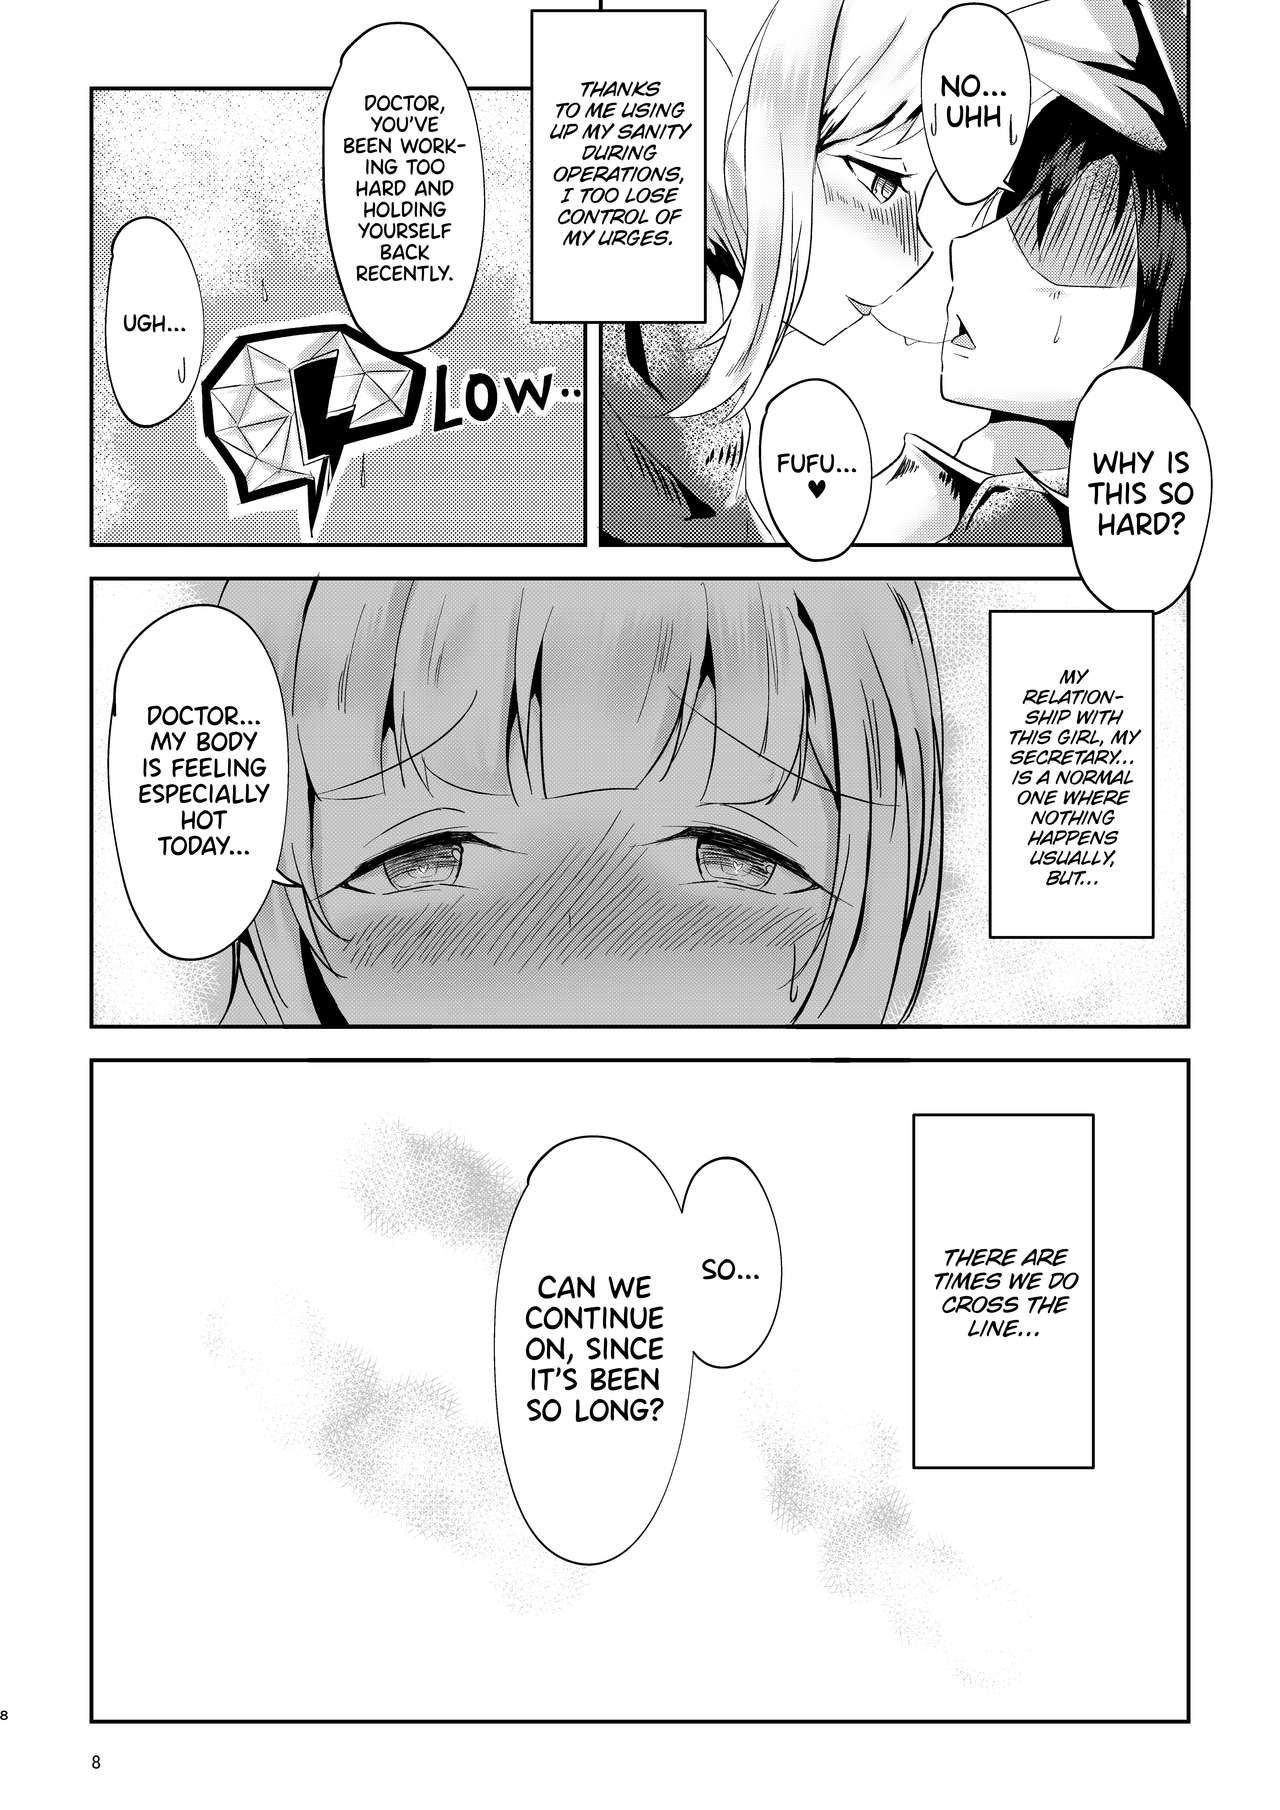 Naughty [Shachi (Kokihanada)] Majime (?) na Kanojo no Souai Bolt | The Blue Love Bolt of a Serious (?) Girl (Arknights) [English] [UncontrolSwitchOverflow] - Arknights Cocksuckers - Page 8